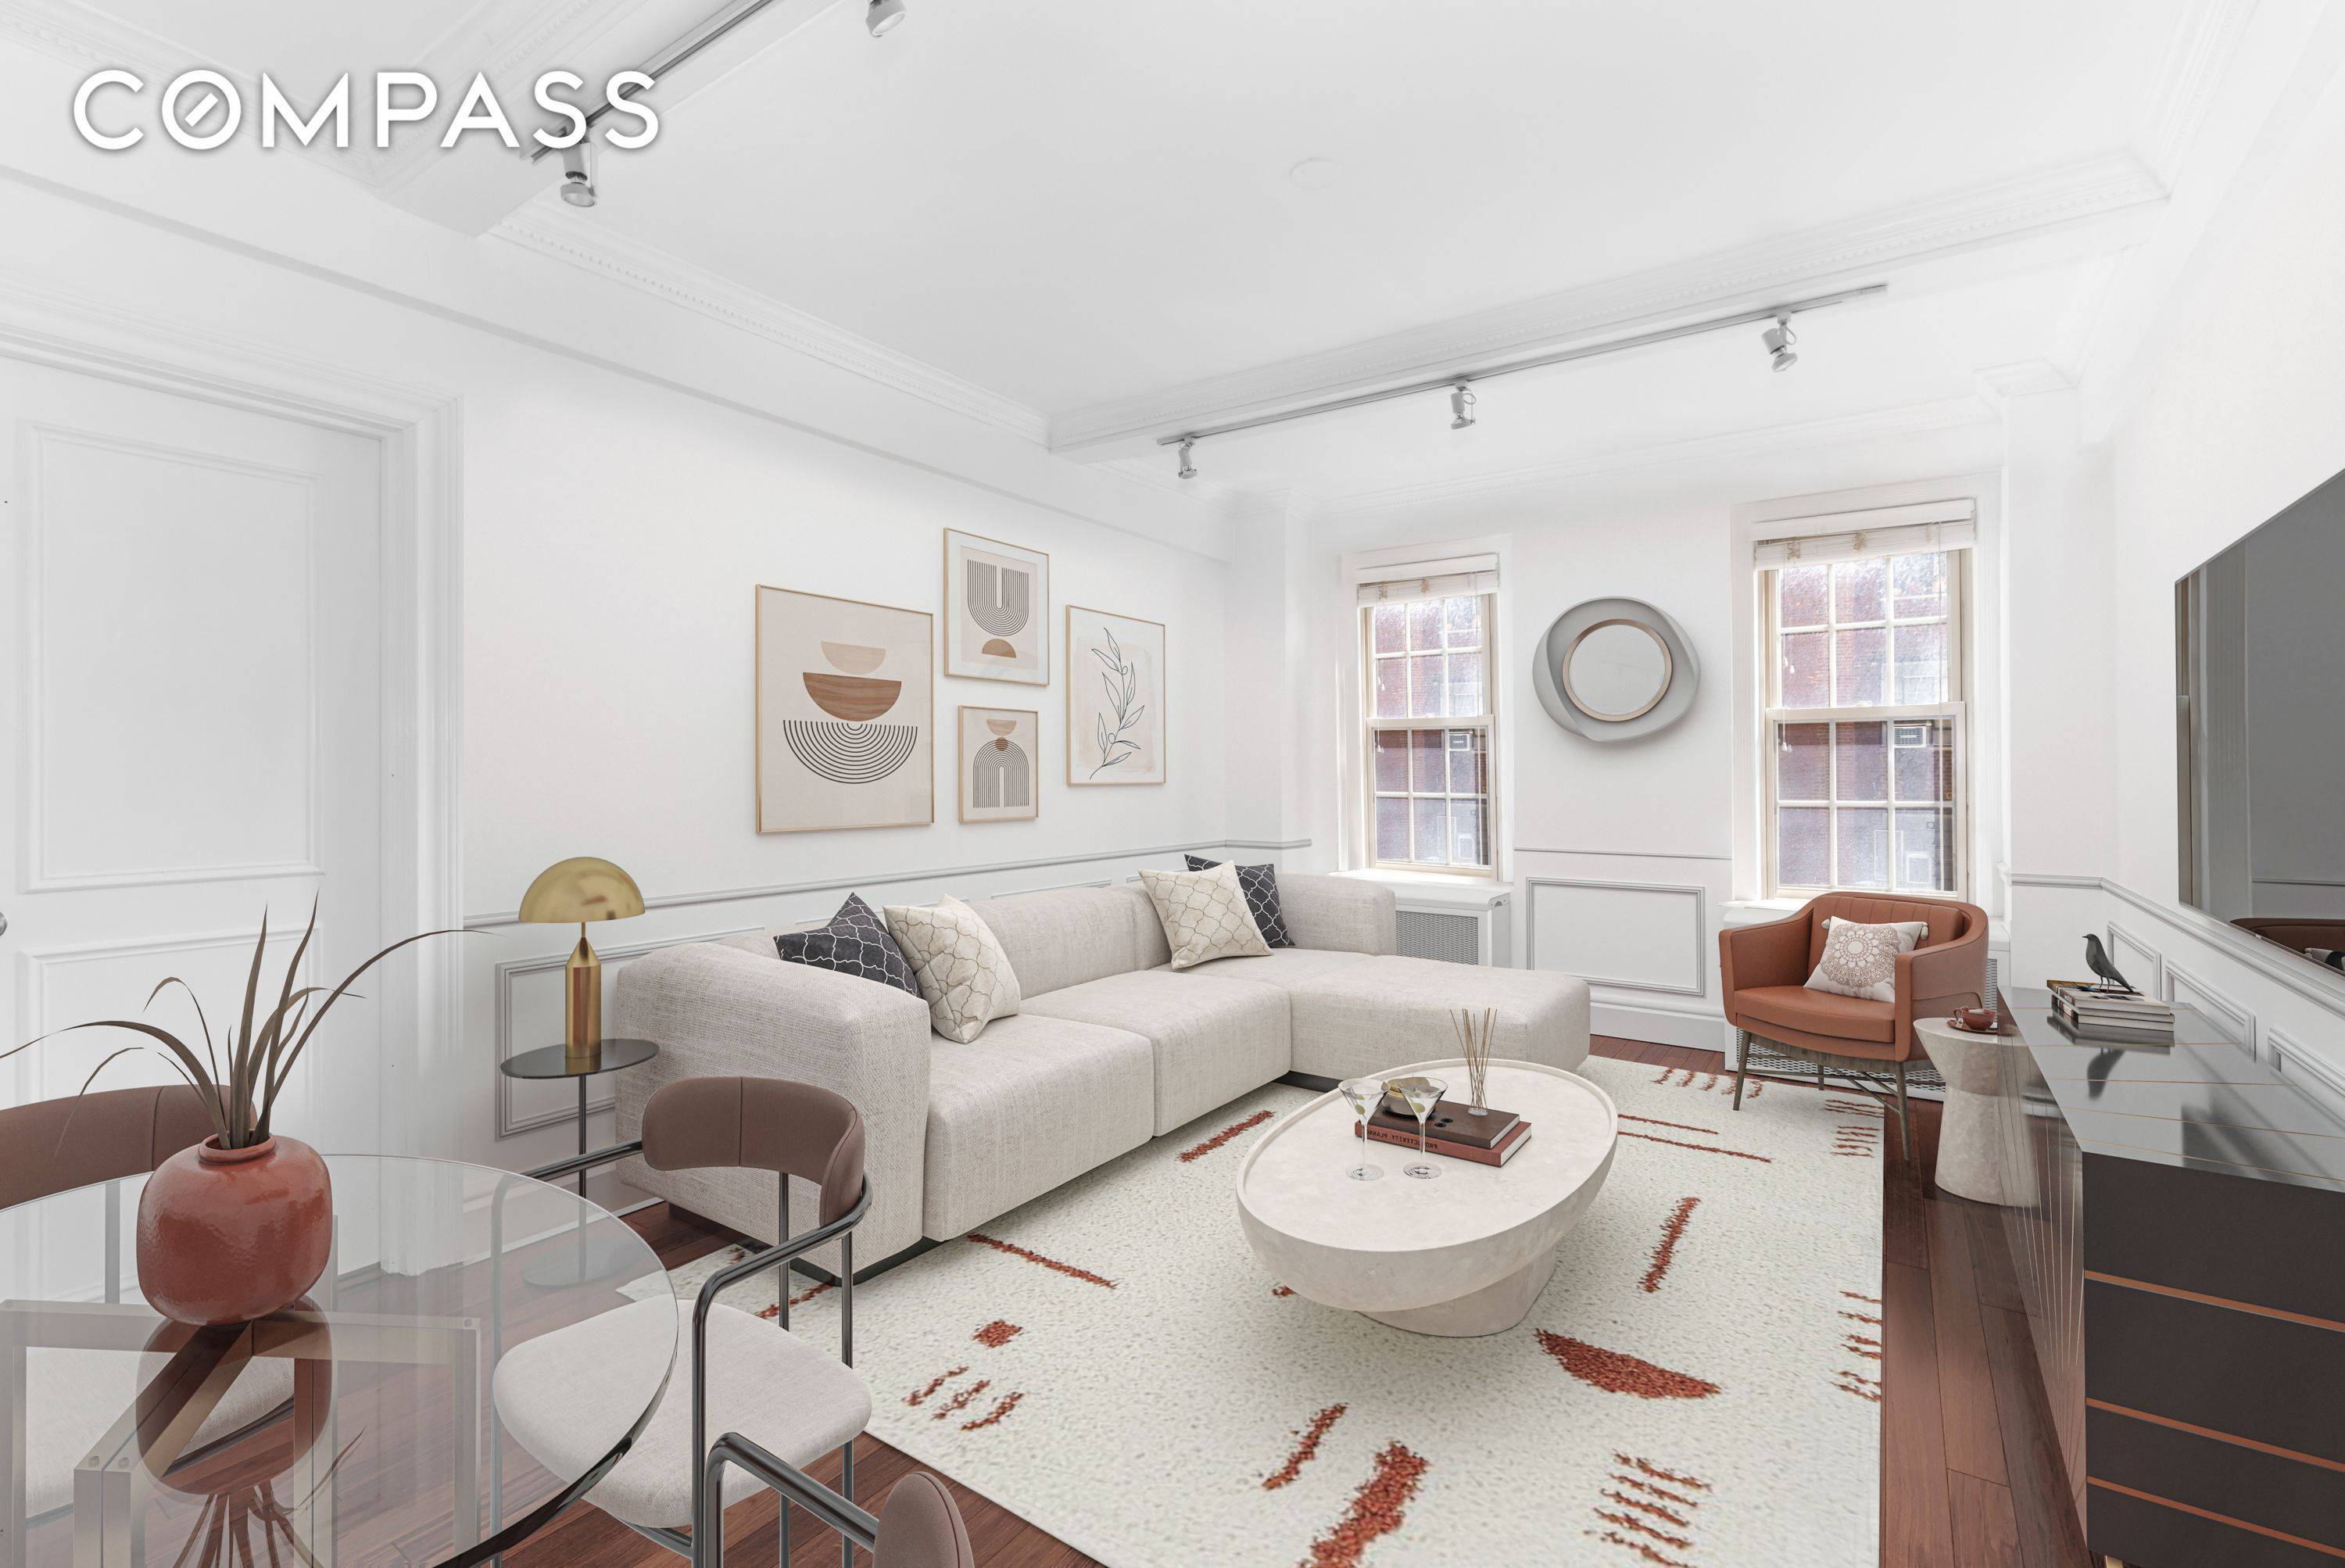 THIS PRISTINE, OVERSIZED SPLIT 2 BEDROOM 2 BATHROOM HOME OFFERS ROOM TO SPRAWL IN THE THE HEART OF GREENWICH VILLAGE !